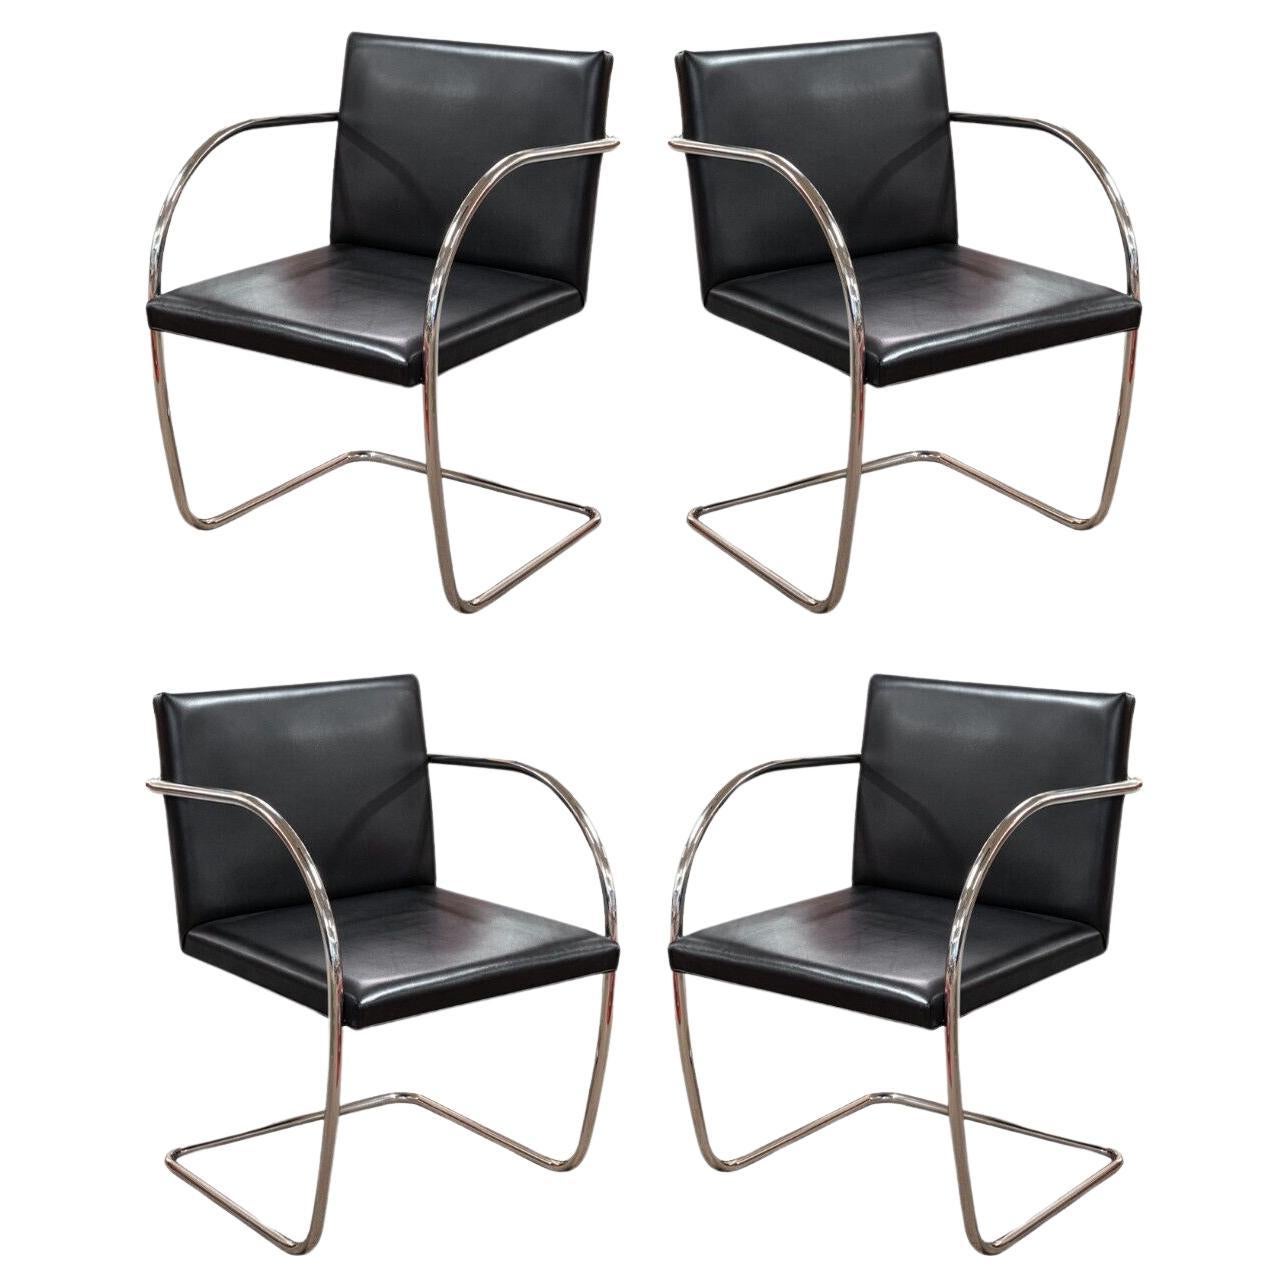 Set of 4 Mies van der Rohe for Knoll Tubular Black Leather Brno MCM Chairs